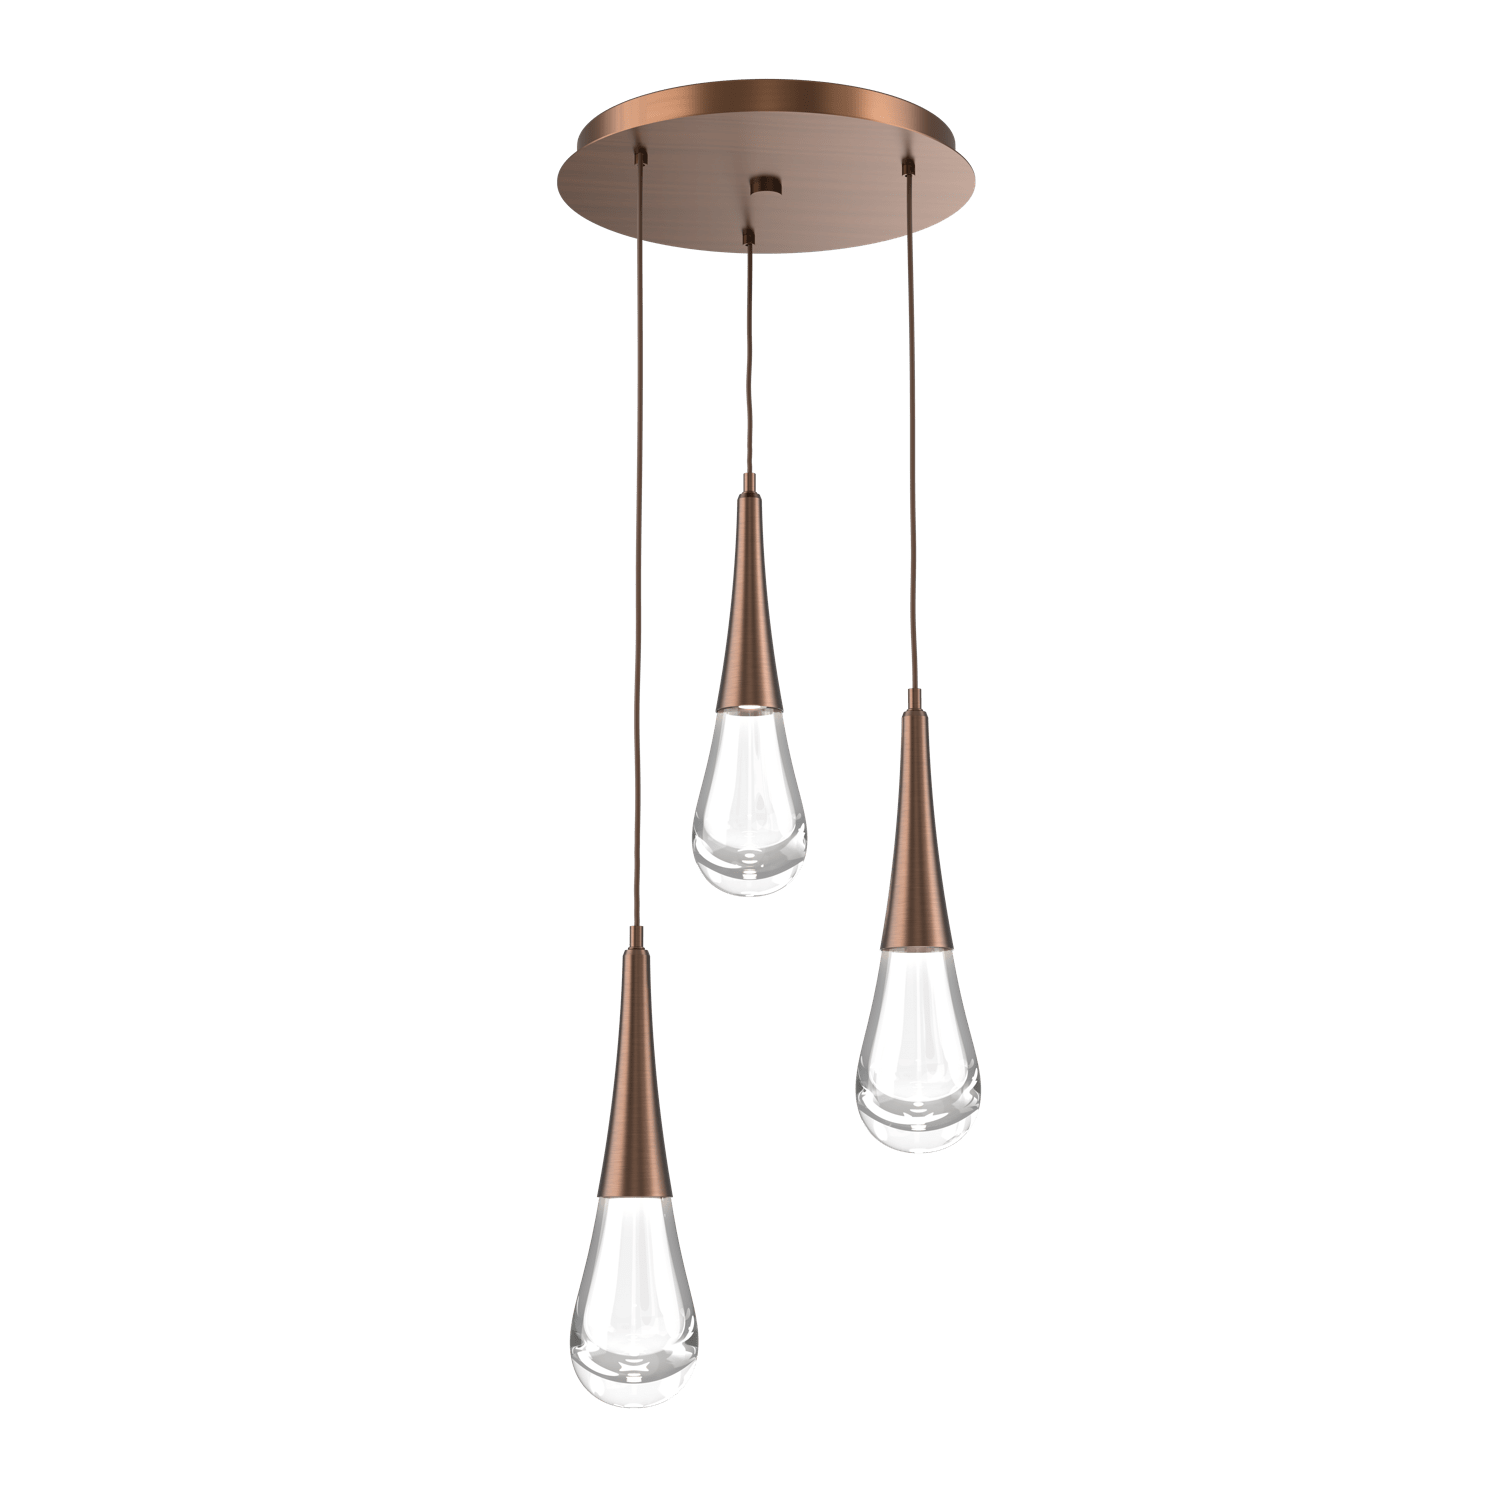 CHB0078-03-RB-Hammerton-Studio-Raindrop-3-light-round-pendant-chandelier-with-oil-rubbed-bronze-finish-and-clear-blown-glass-shades-and-LED-lamping